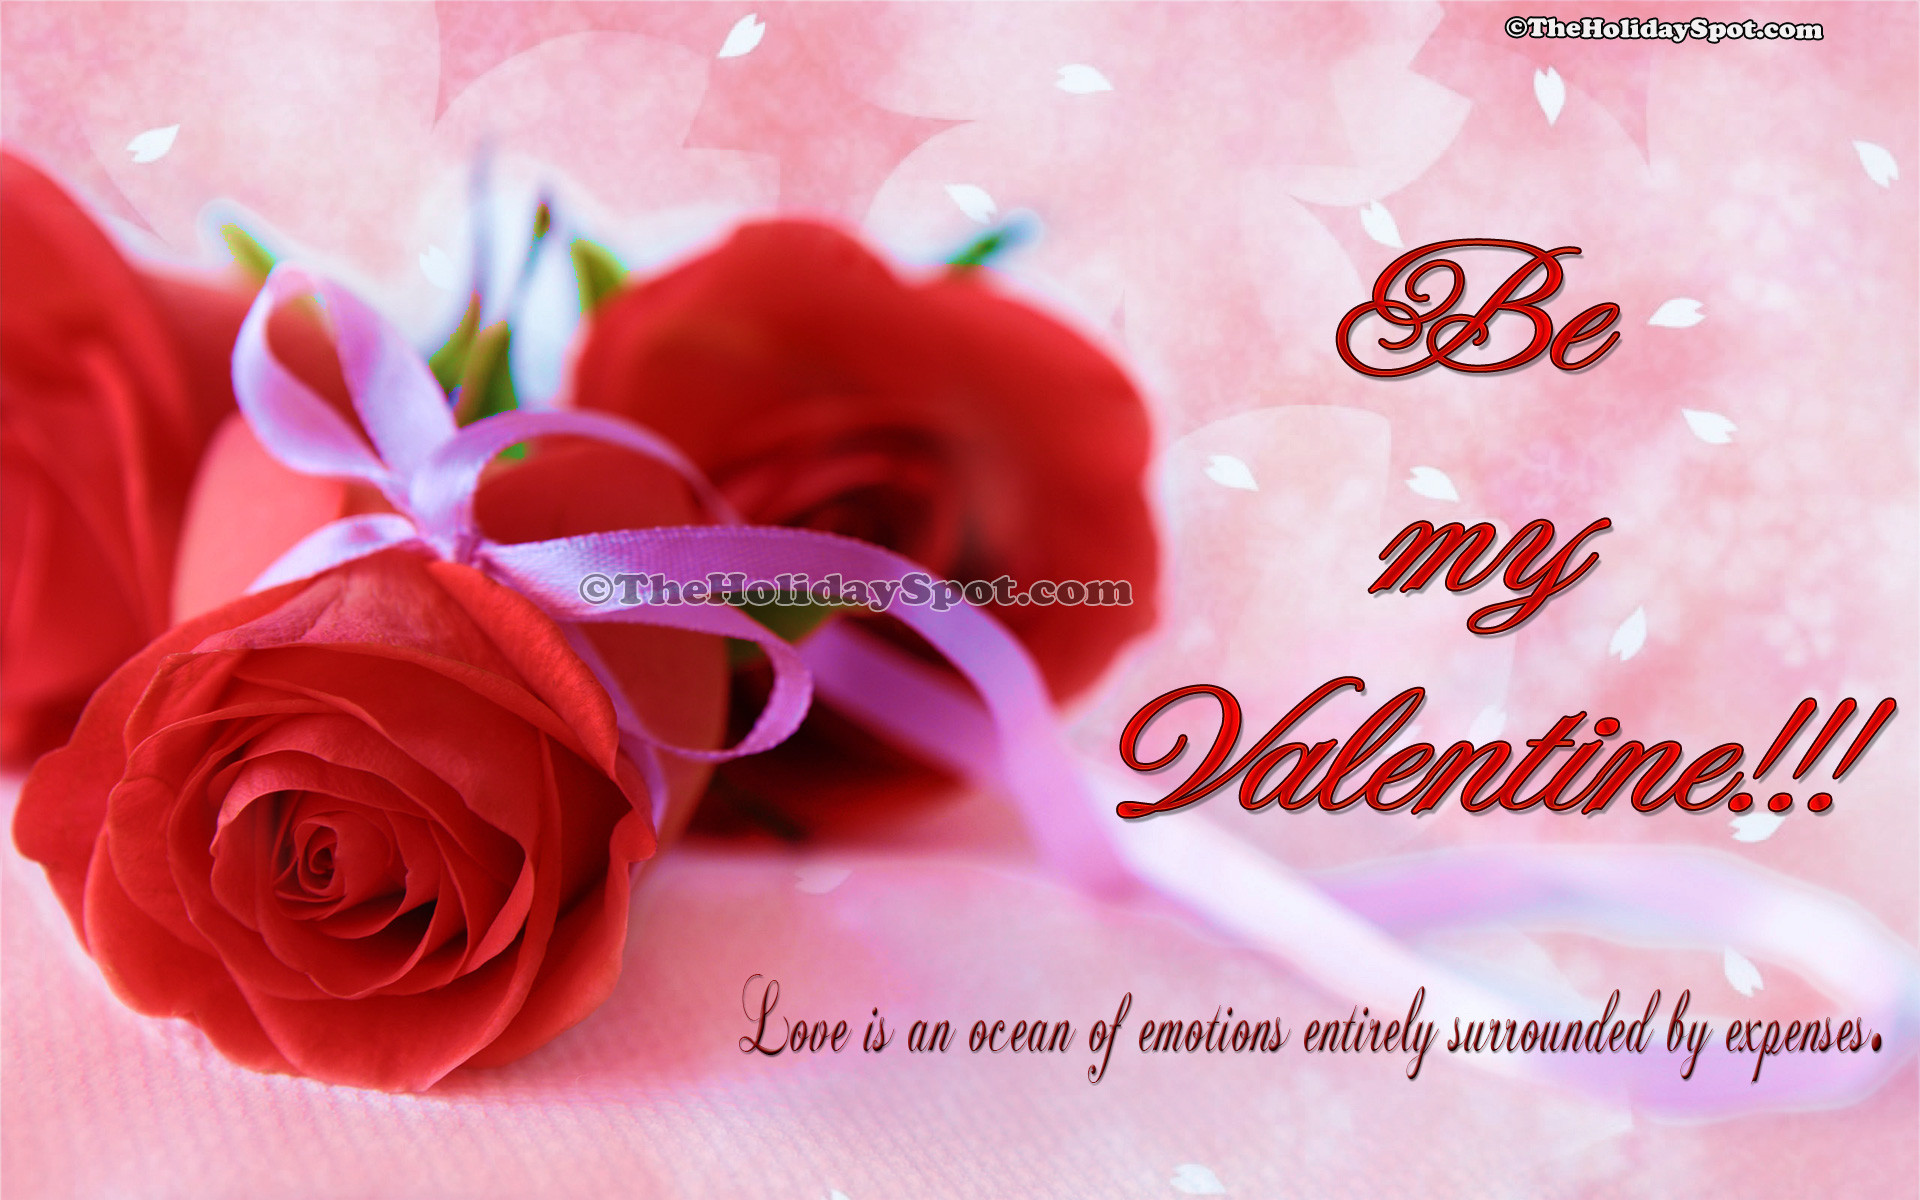 HD valentines day wallpapers of two red roses